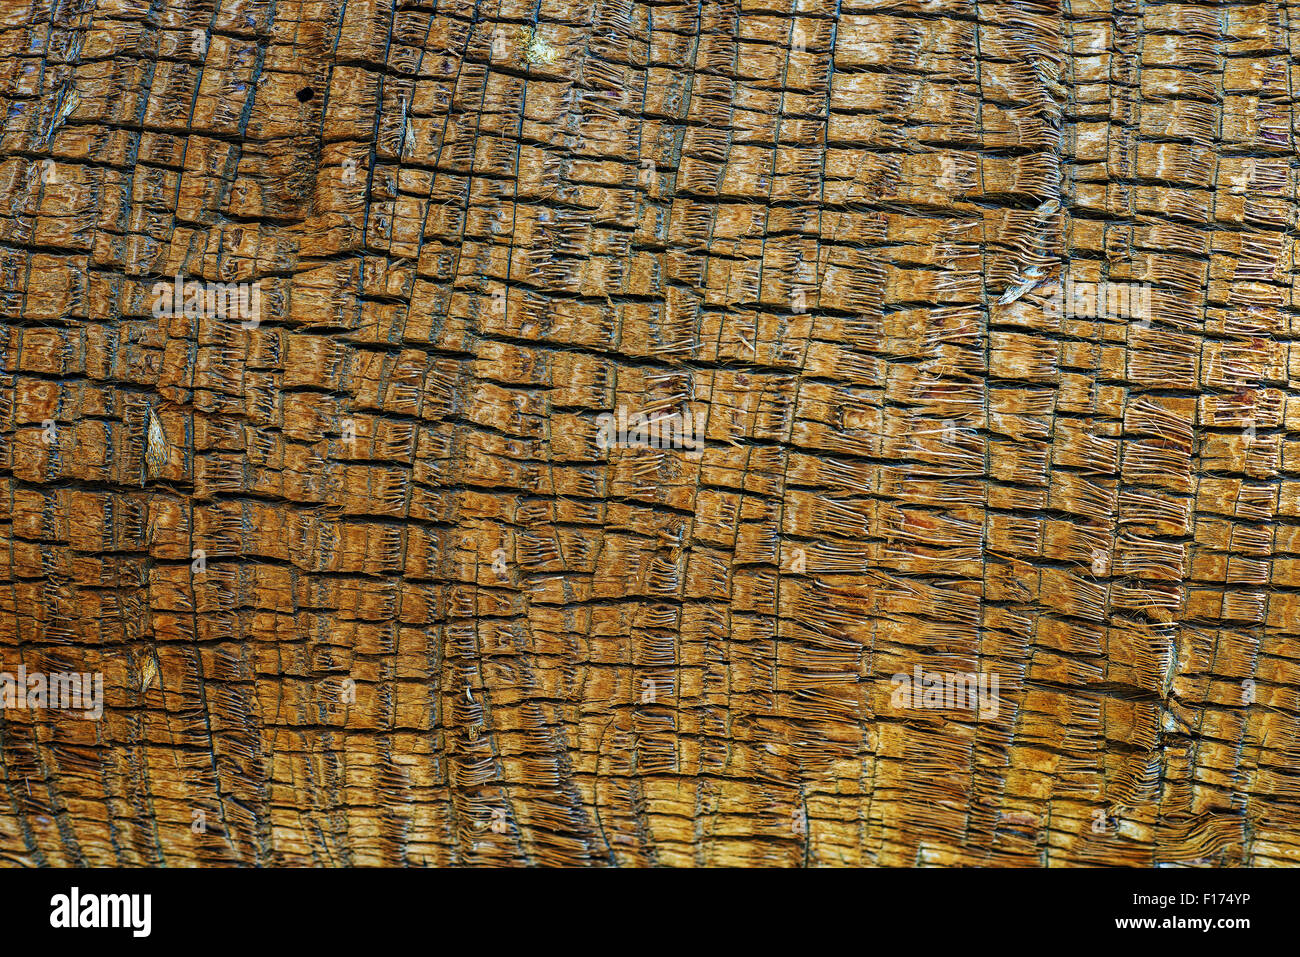 Palm Tree Bark Wooden Material Background Stock Photo